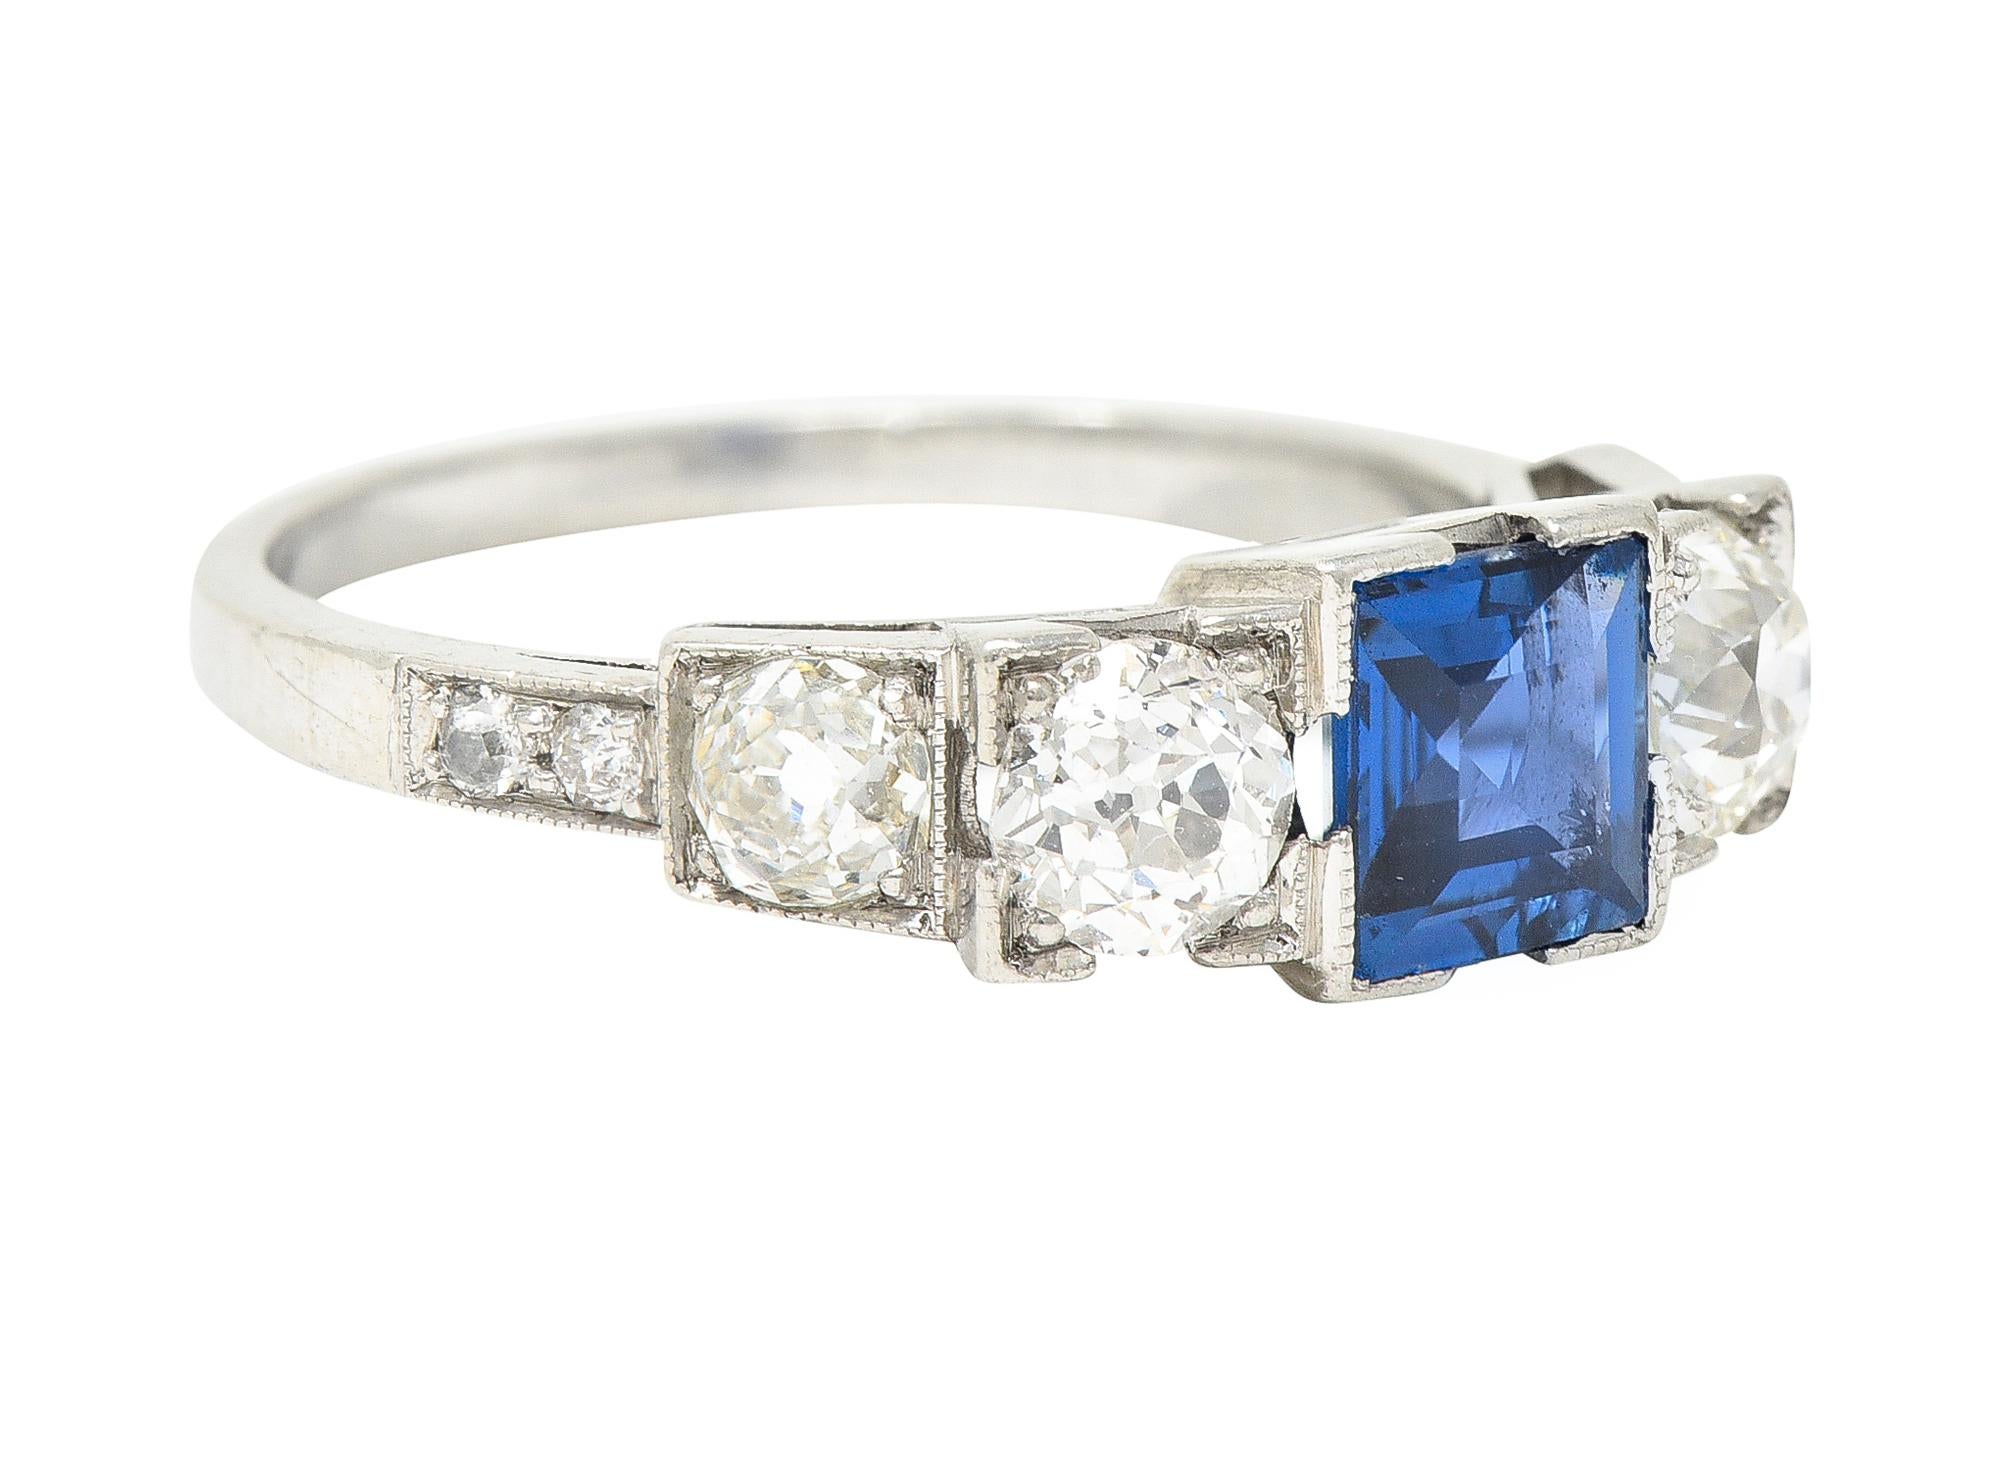 Band ring features five prominent gemstones. Set to front in square form heads and flanked by cathedral shoulders. Centering a square step cut sapphire weighing approximately 1.00 carat. Extremely eye-clean and blue in color with medium saturation.